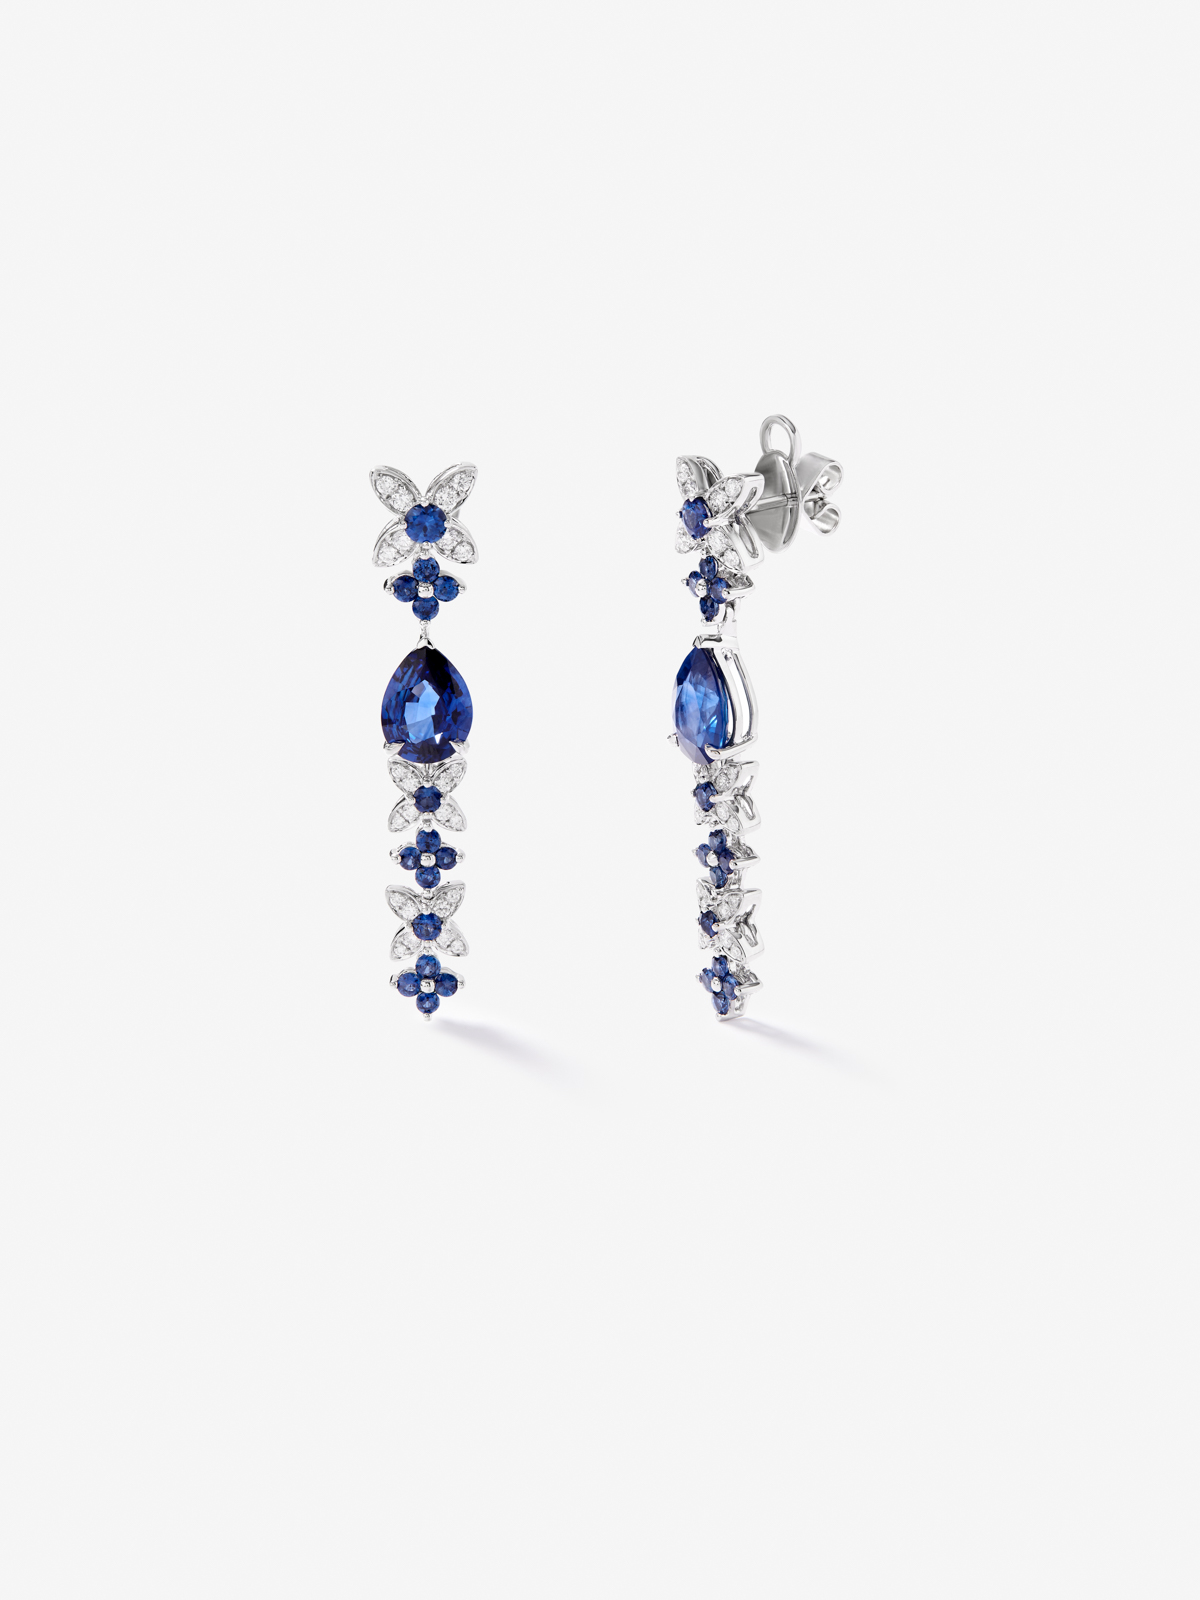 18k white gold earrings with royal blue sapps in pear size 4.05 cts, blue sapphires in bright size 1.27 cts and white diamonds in a bright size of 0.5 cts